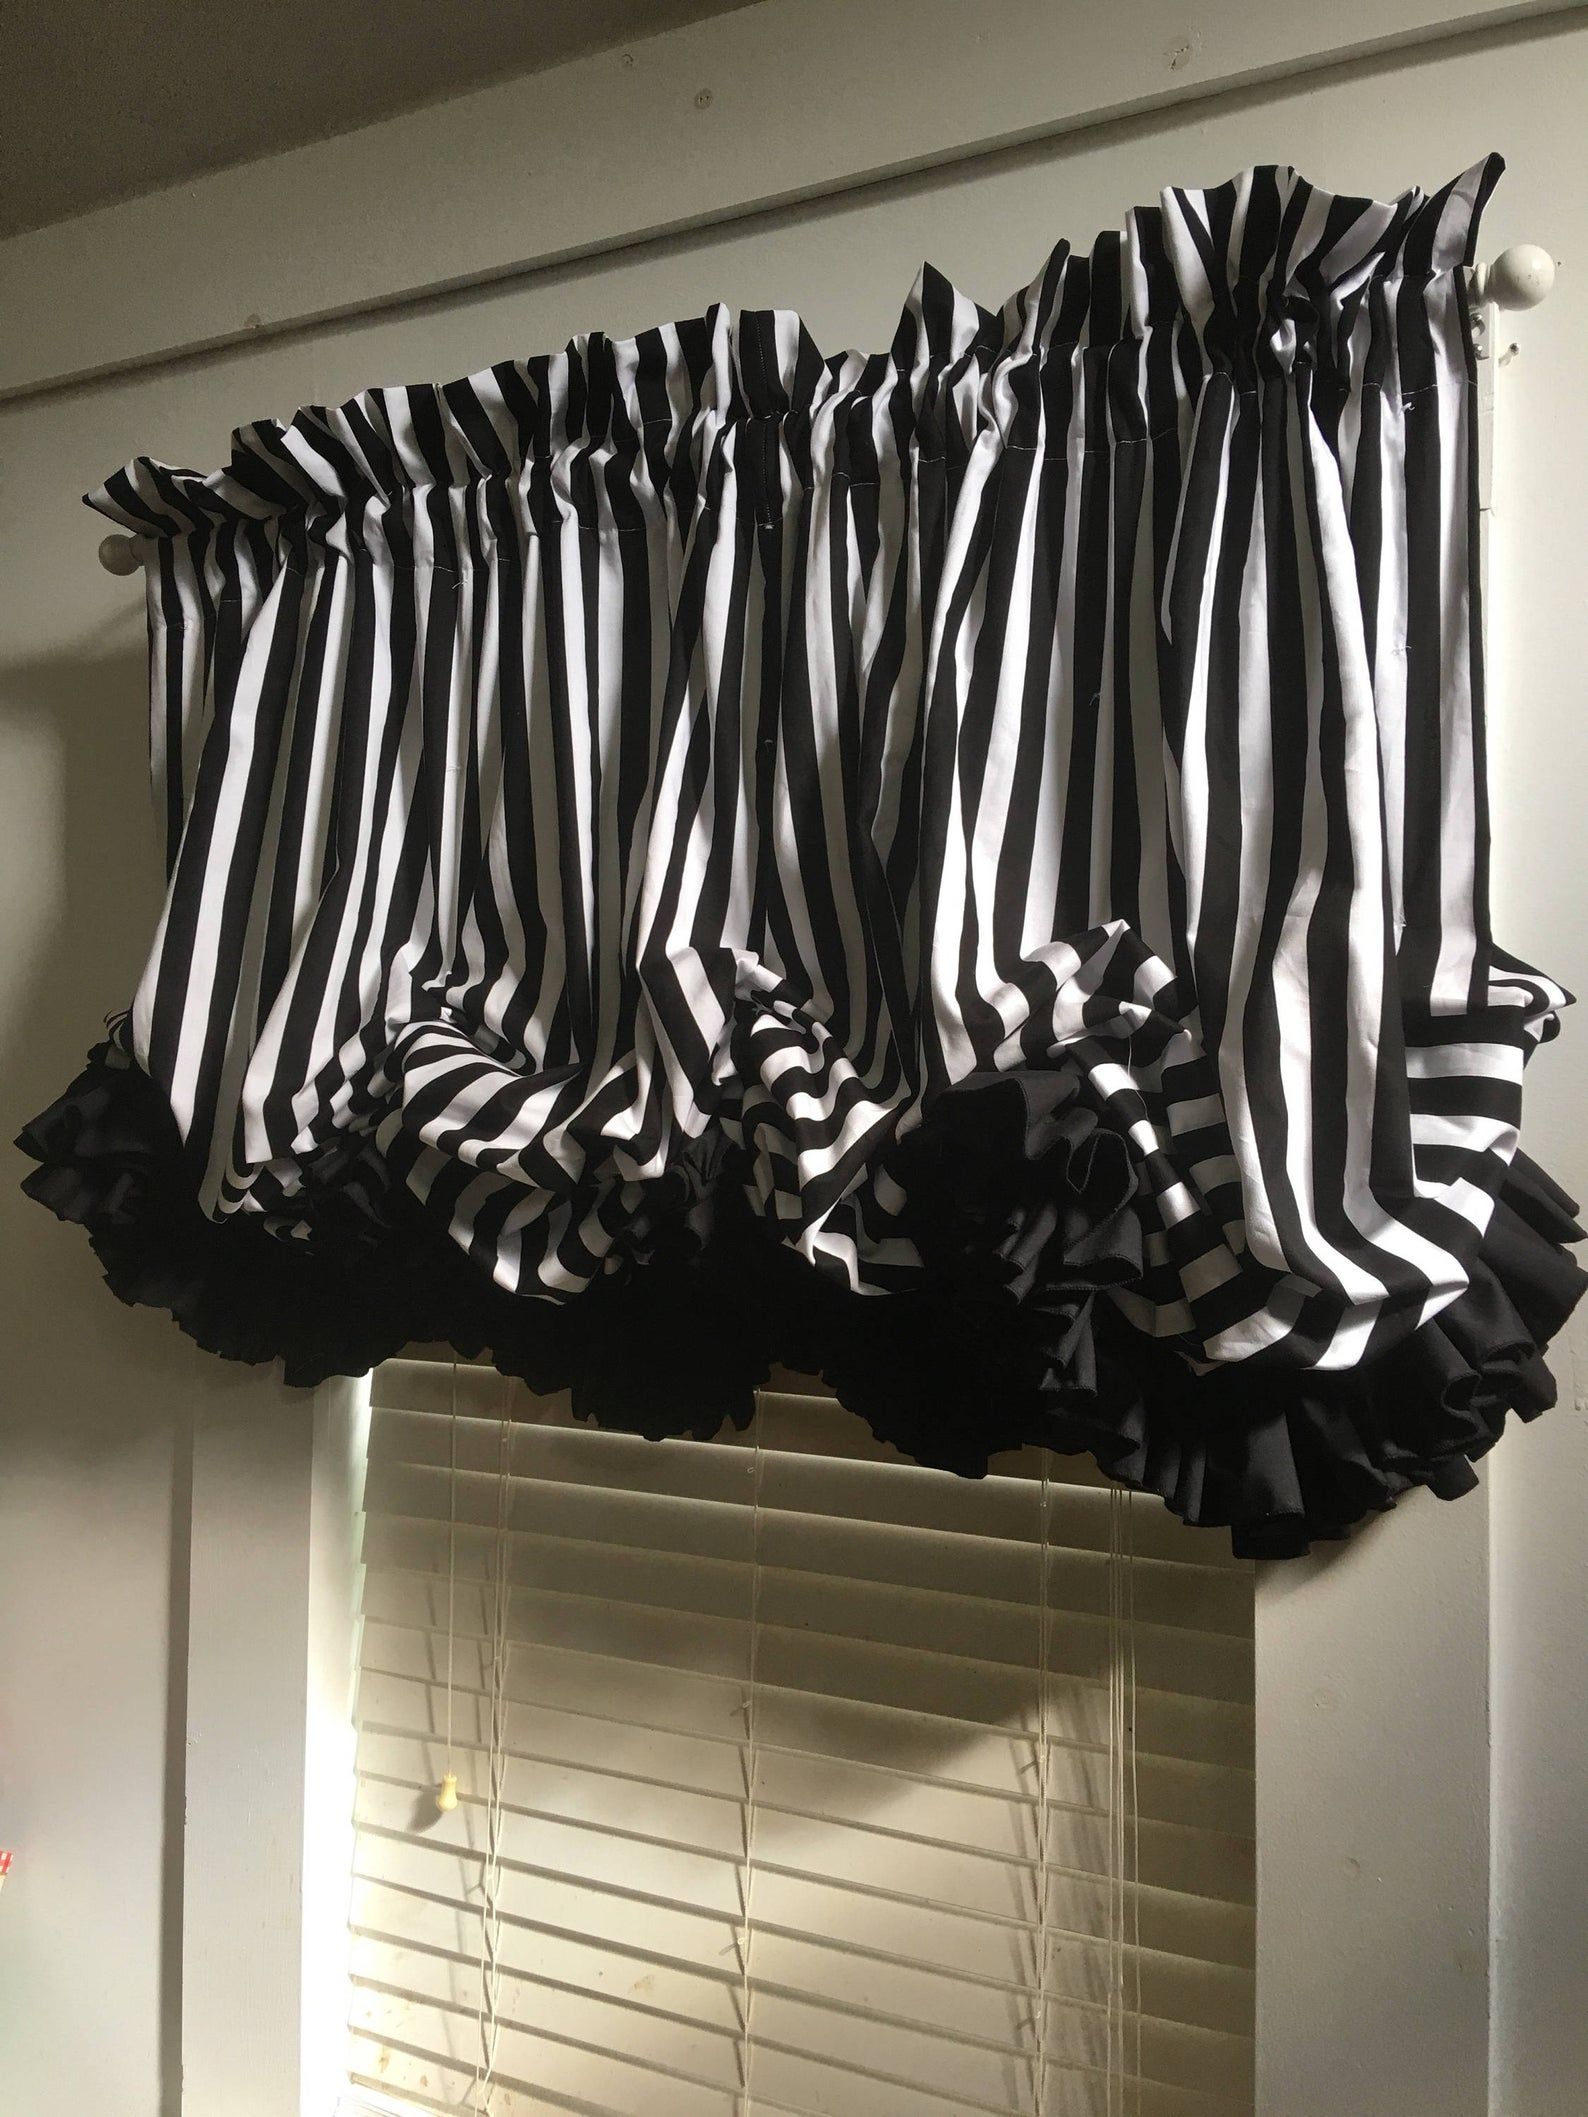 Timeless Elegance: Black and White Kitchen Curtains for a Classic Look